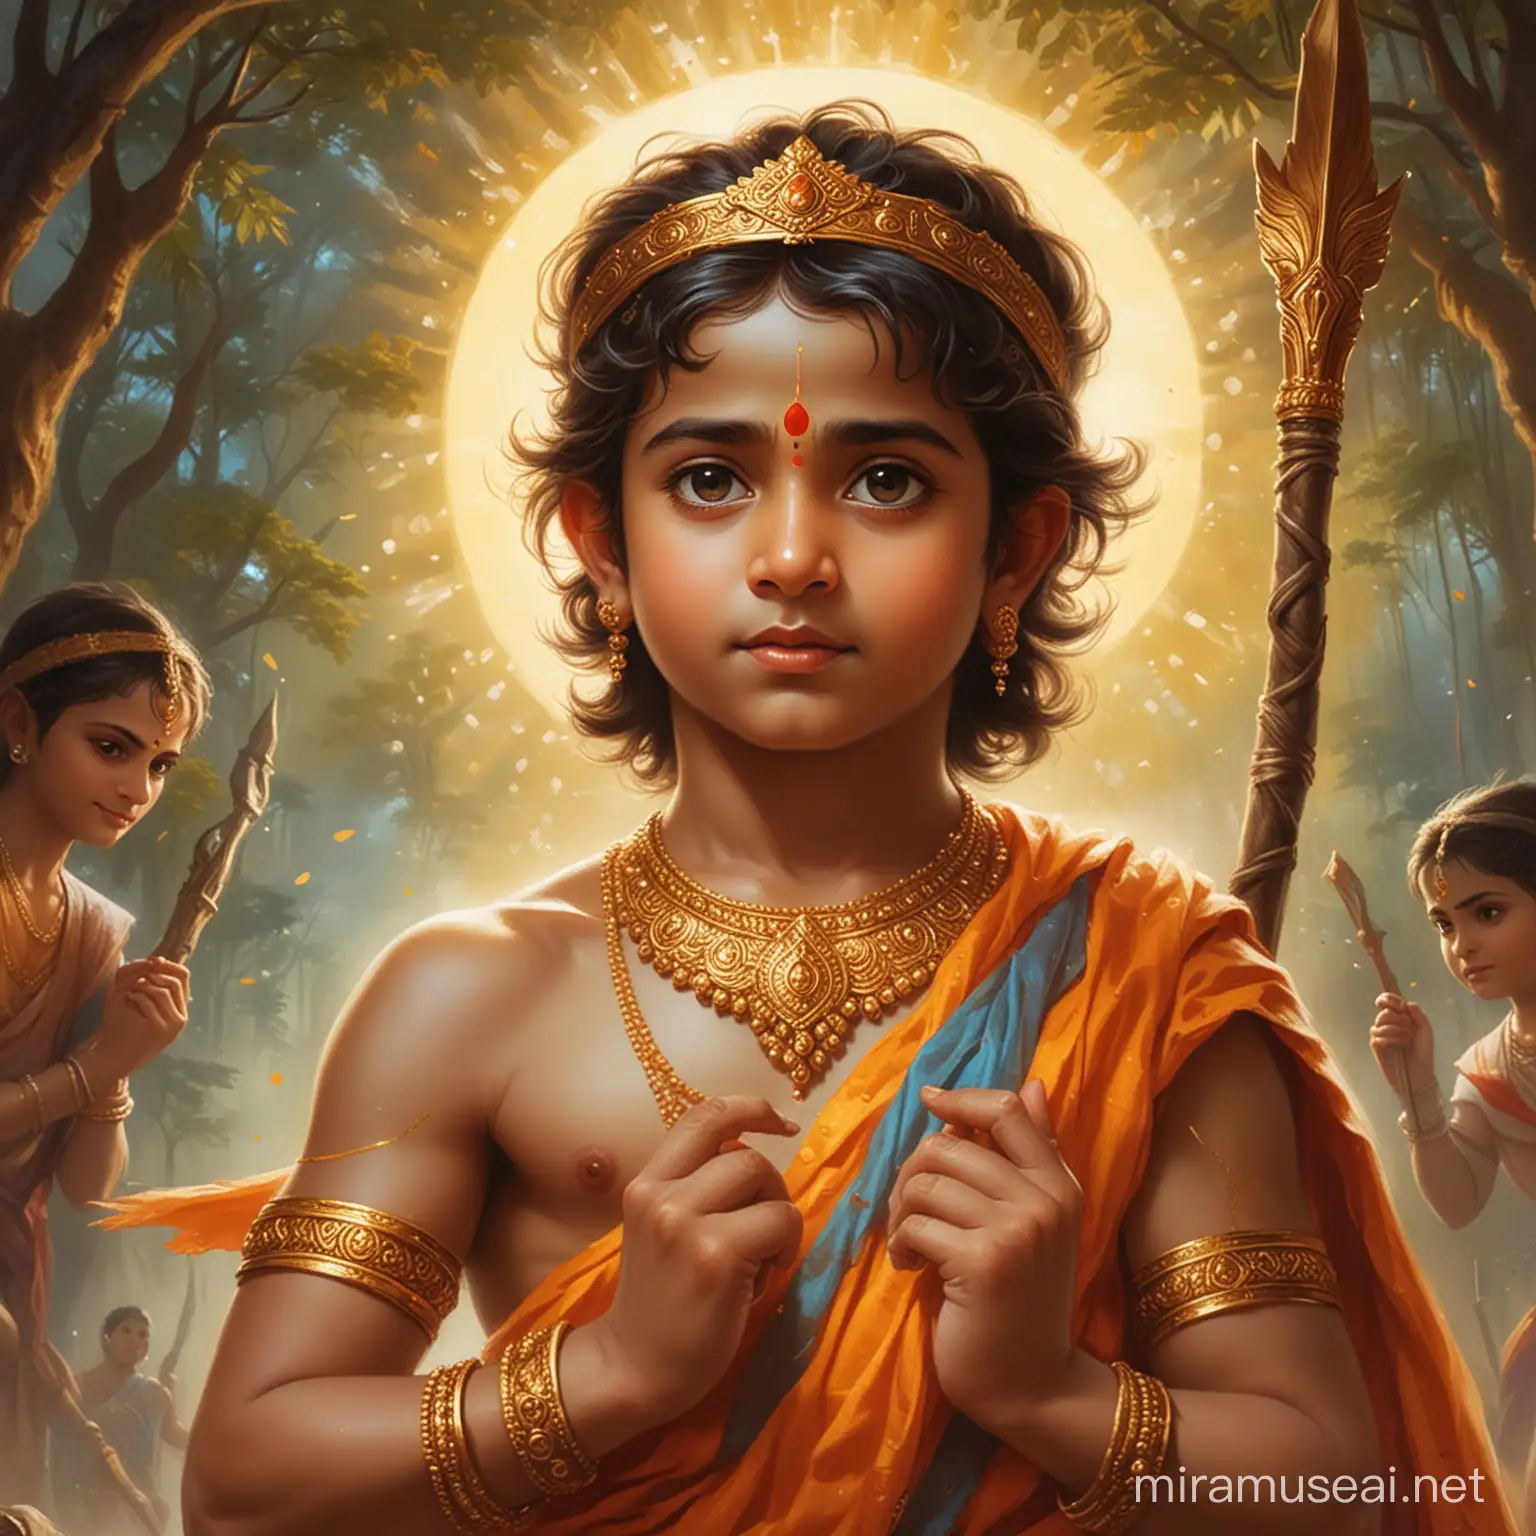 "Imagine Lord Rama, the embodiment of virtue and strength, taking the form of a child. Write a scene where the divine presence of Lord Rama shines through the innocence and purity of a child's face. Capture the essence of his wisdom, compassion, and courage as he interacts with the world around him in this youthful guise."